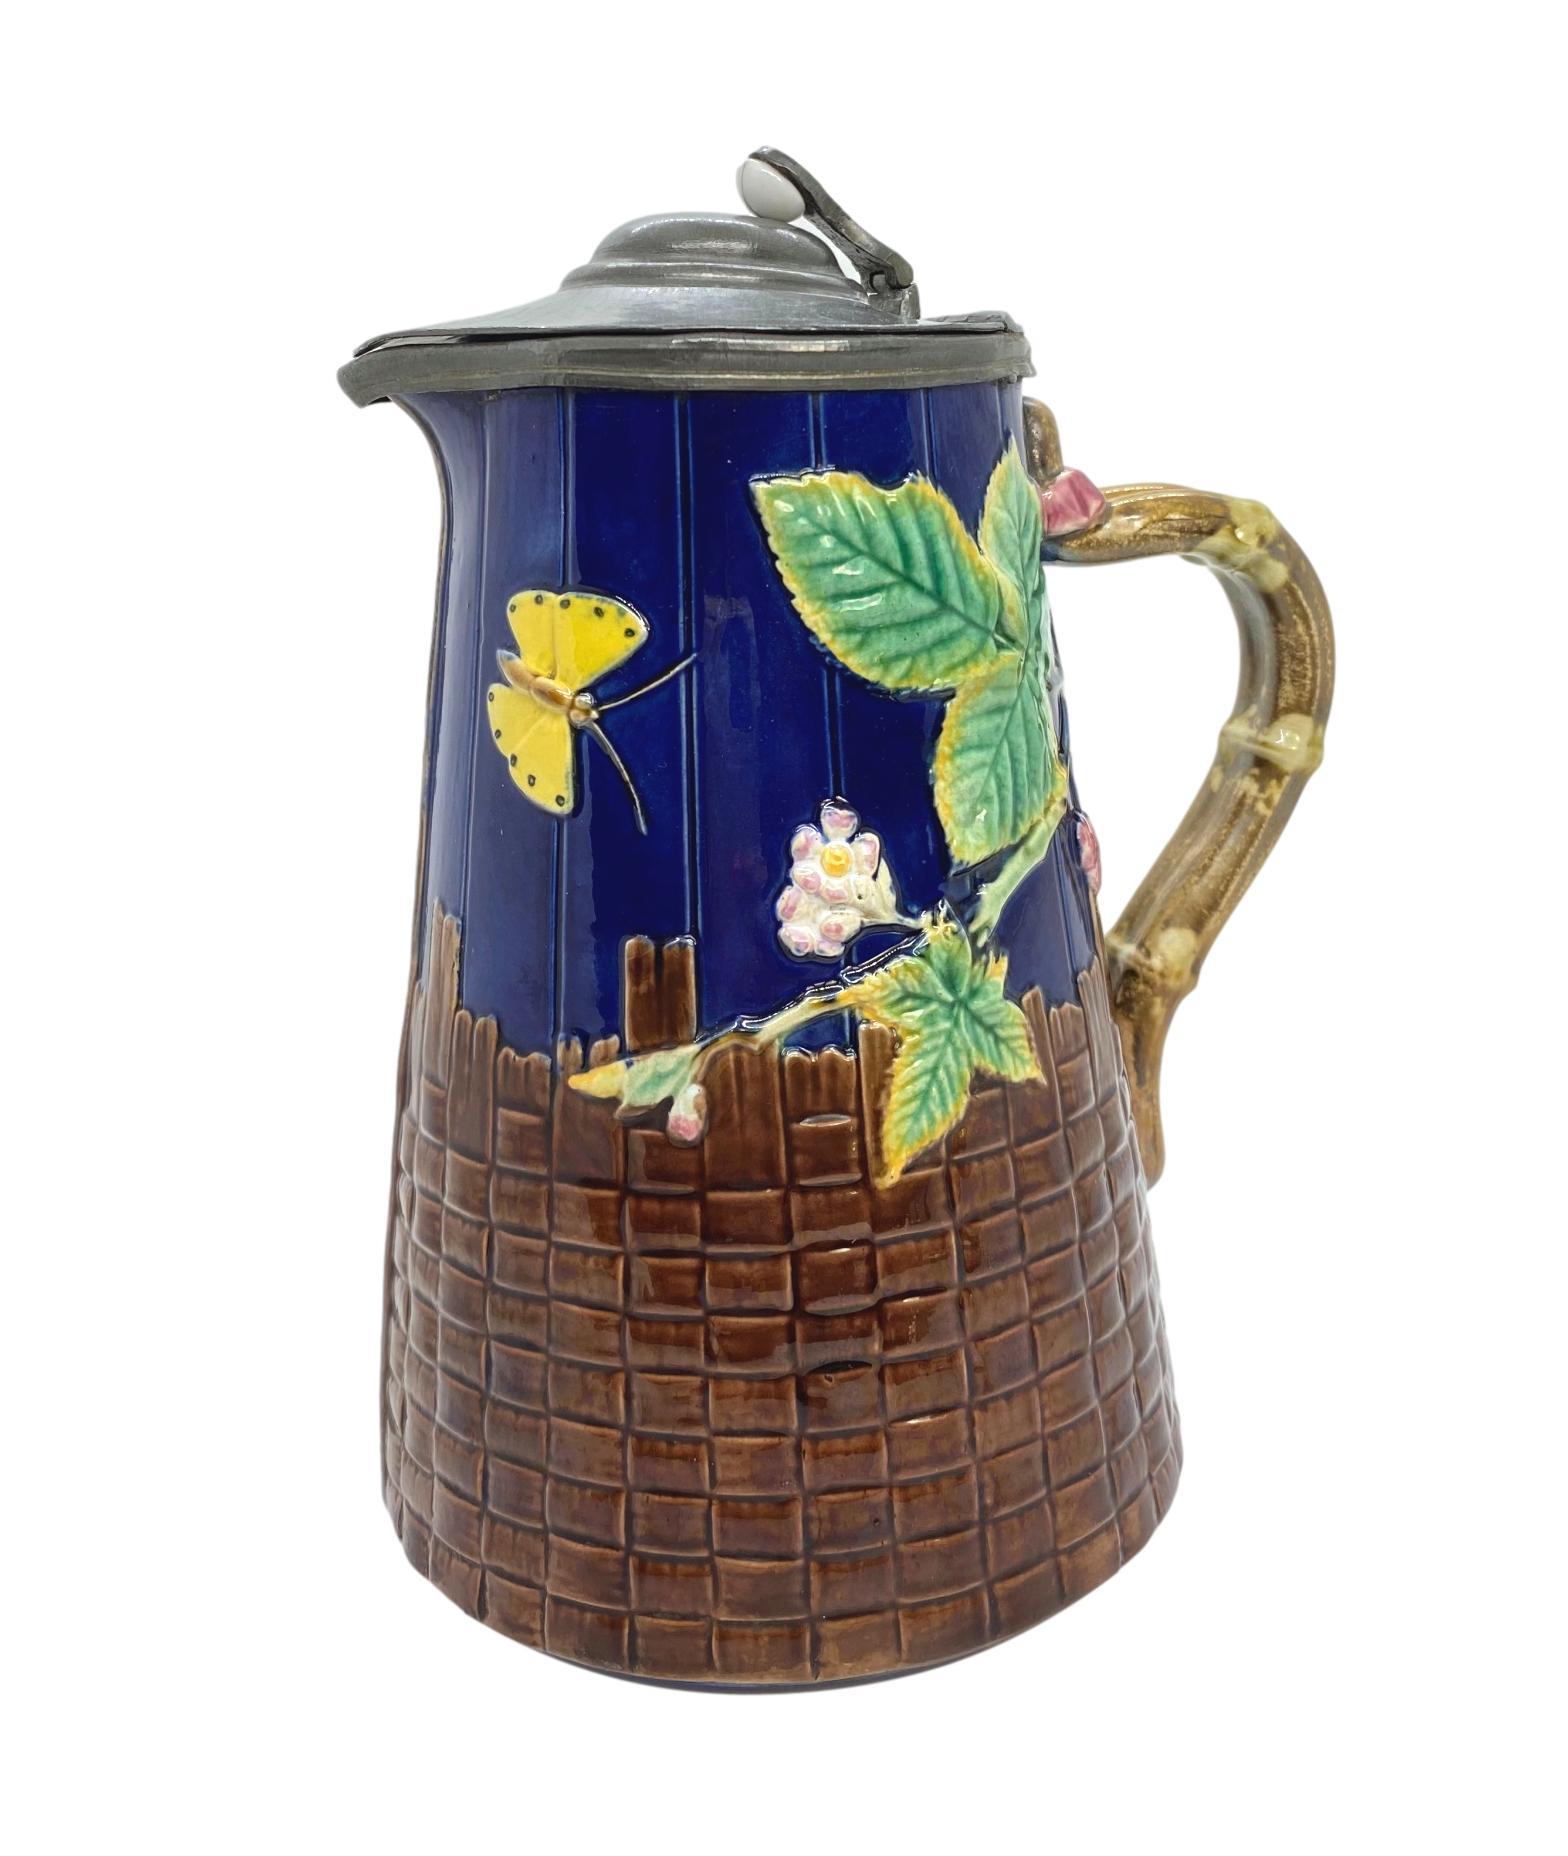 T. C. Brown-Westhead Moore & Co. Majolica Butterfly Pitcher, on cobalt blue-glazed simulated wooden staves and brown basketweave, with faux bamboo handles, the interior glazed in lavender, the reverse with British Registry Mark for 19 September